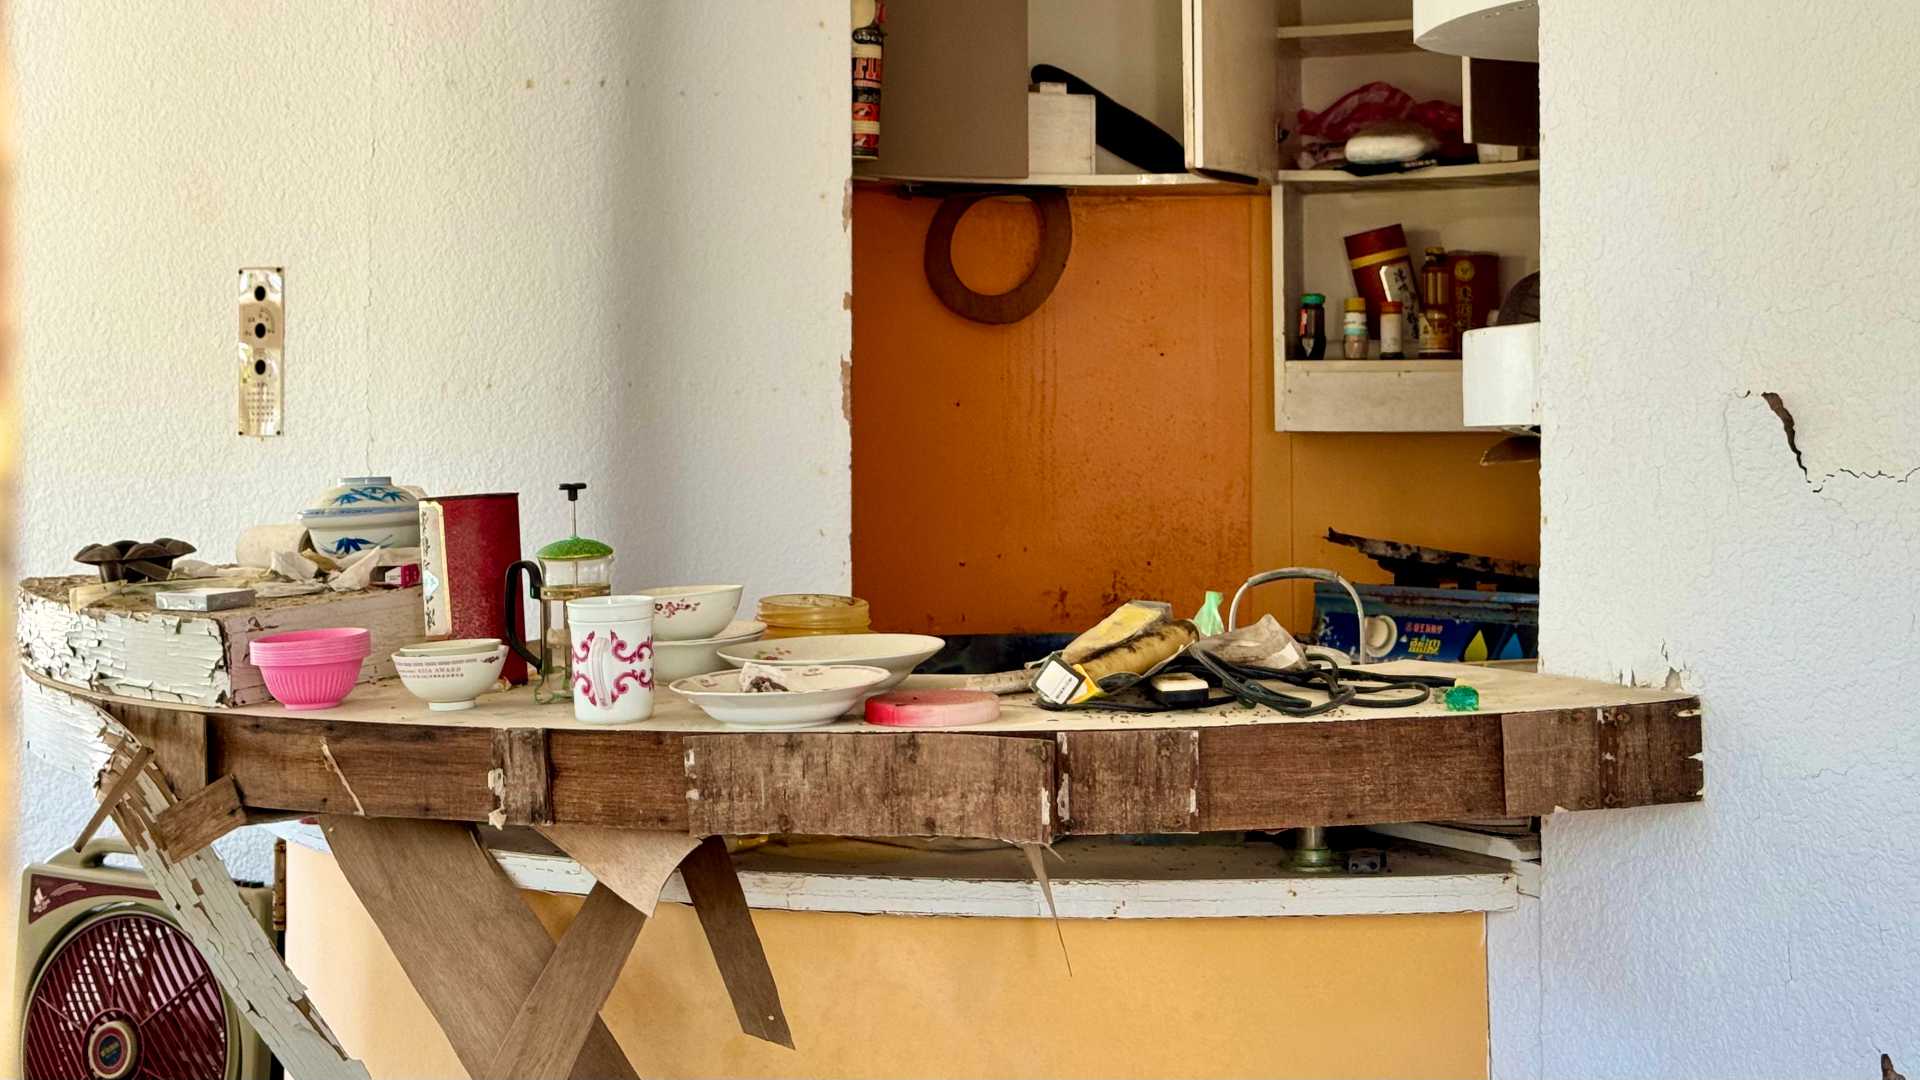 A partially-dismantled and broken kitchen, with plates, a coffee cup, and a coffee plunger on the counter.